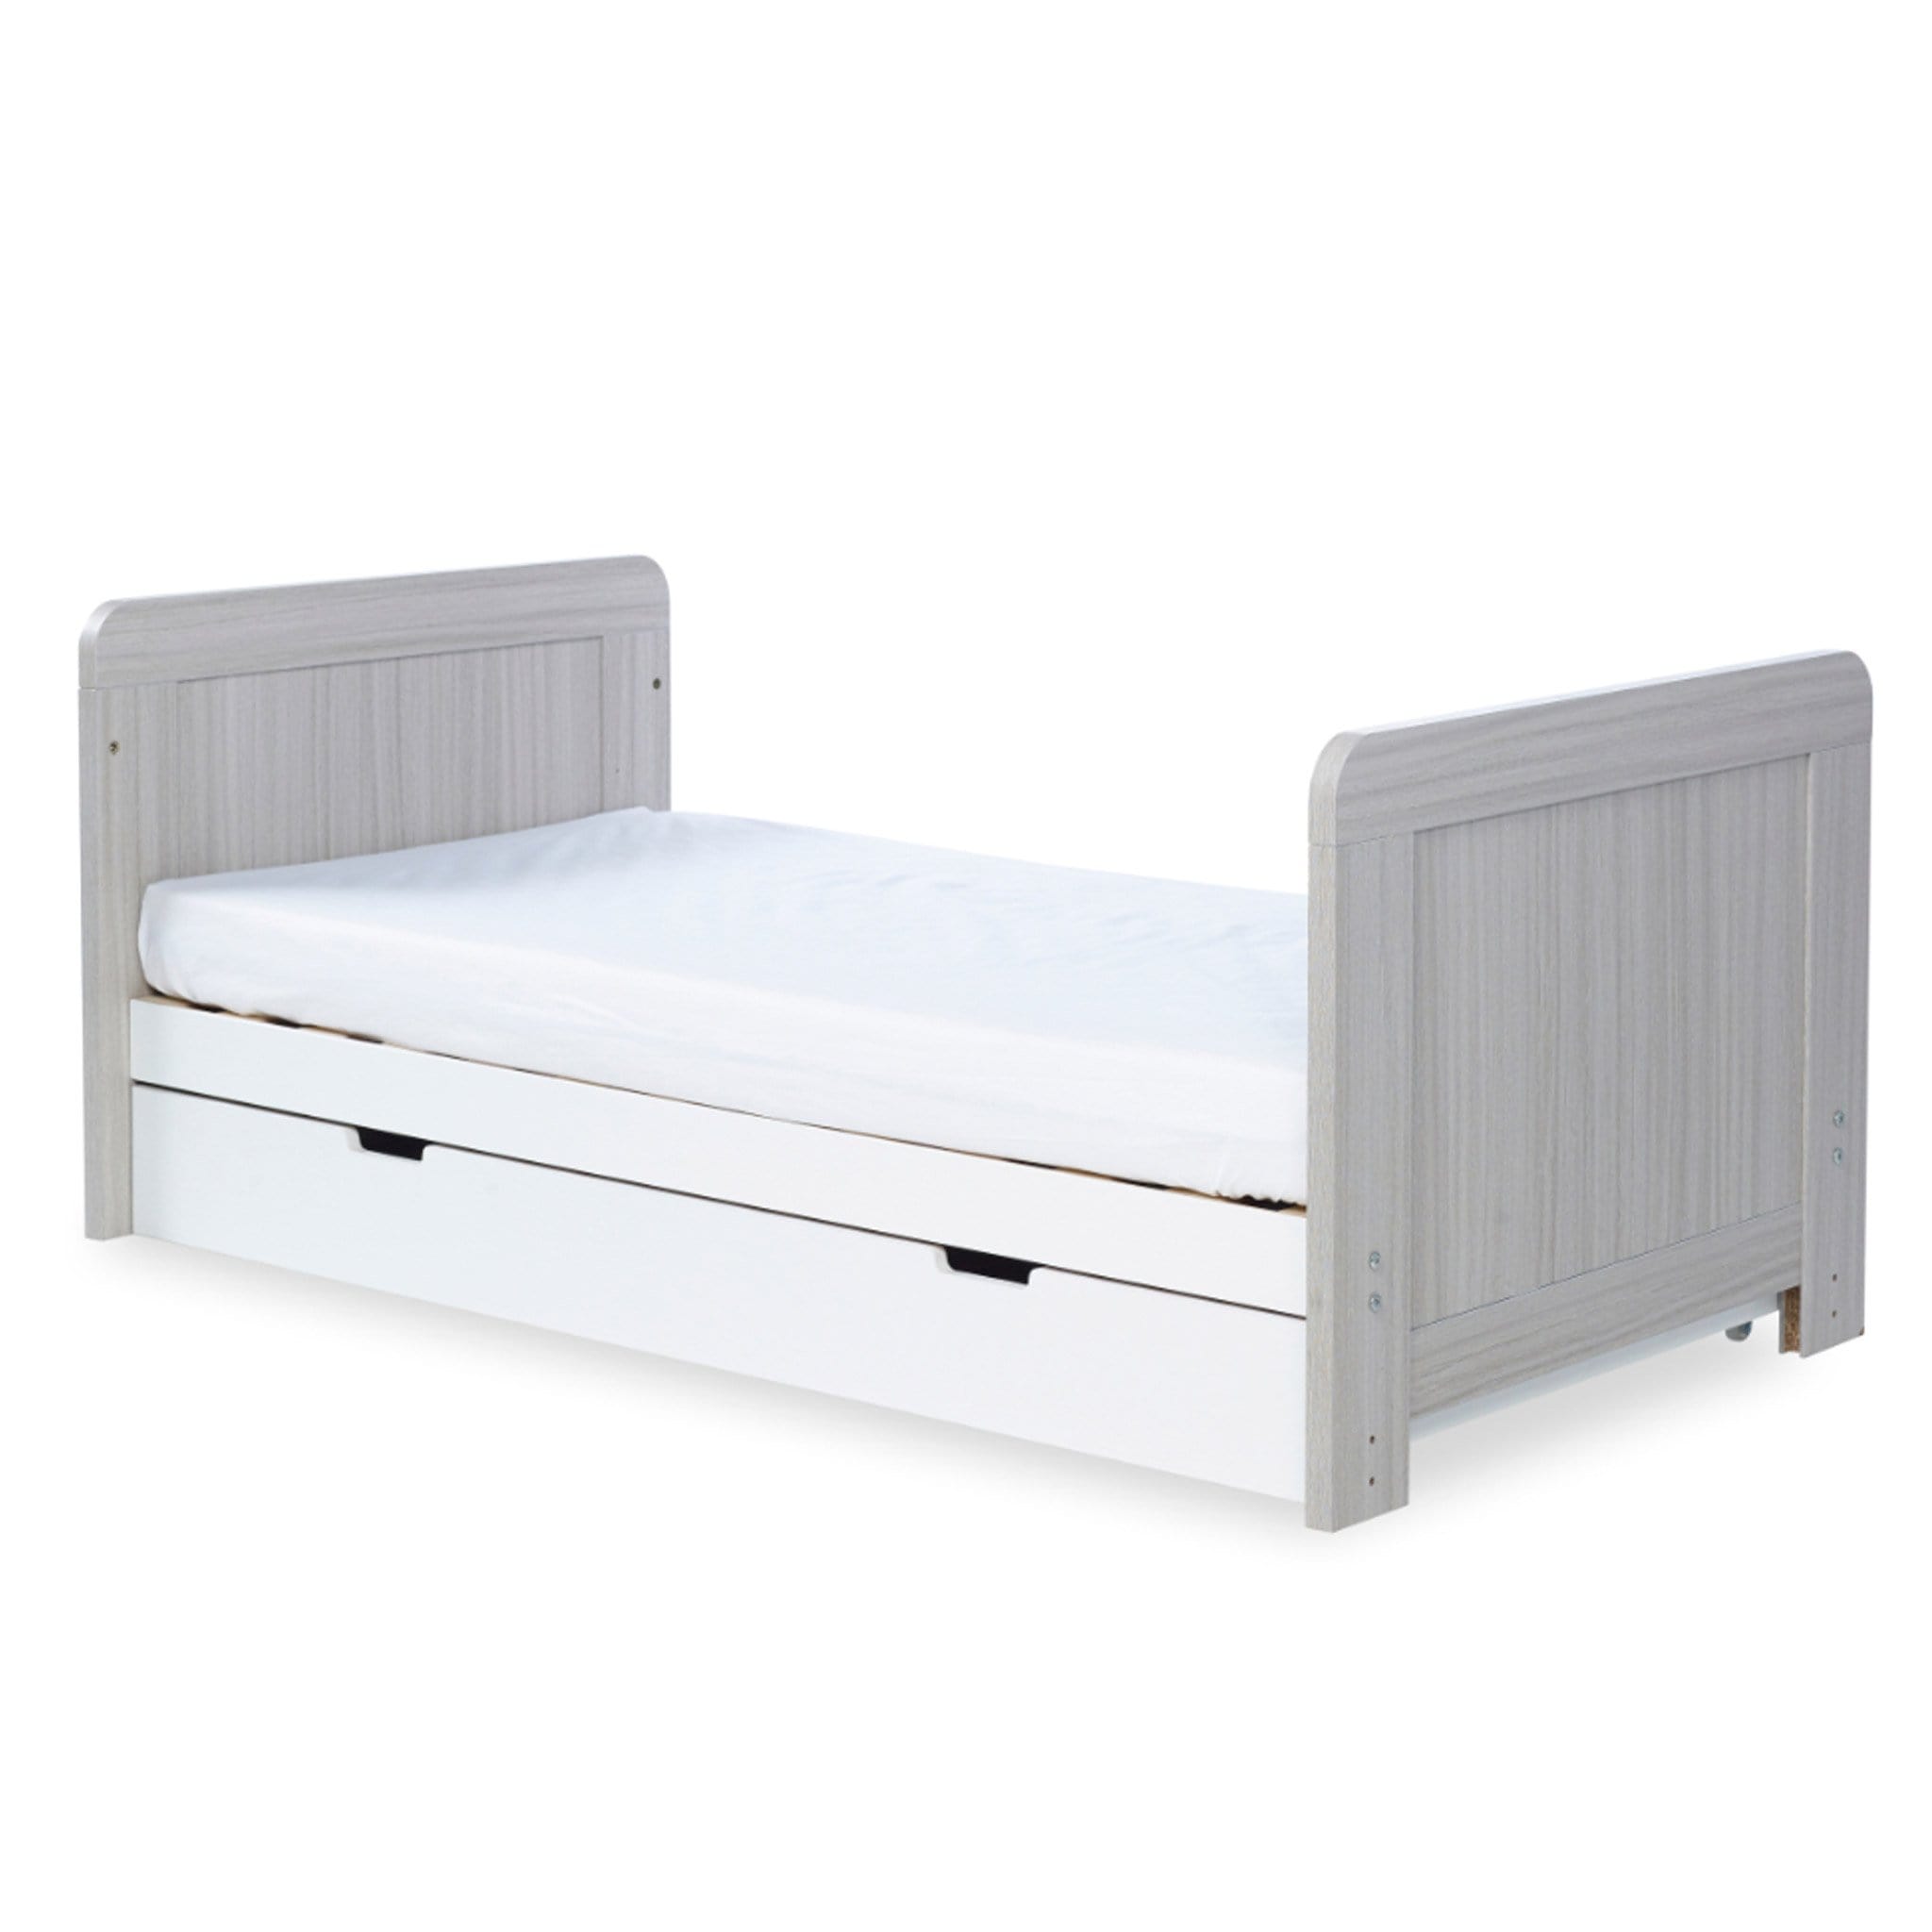 Ickle Bubba cot bed room sets Ickle Bubba Pembrey Cotbed, Under Drawer & Changing Unit Ash Grey & White